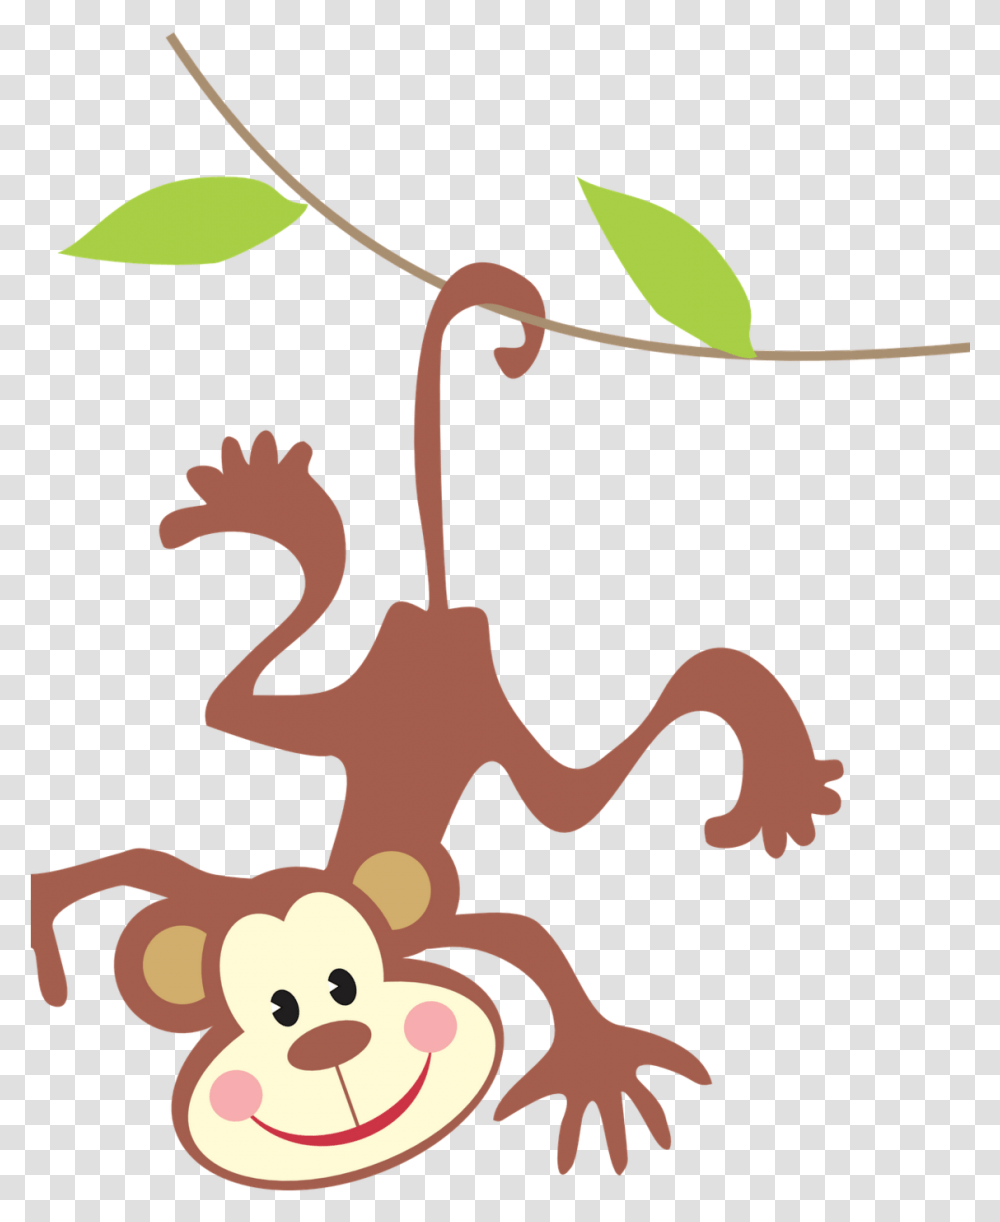 Download Clipart Monkey Jungle Animal Part Of A Sentence In English, Plant, Leaf Transparent Png